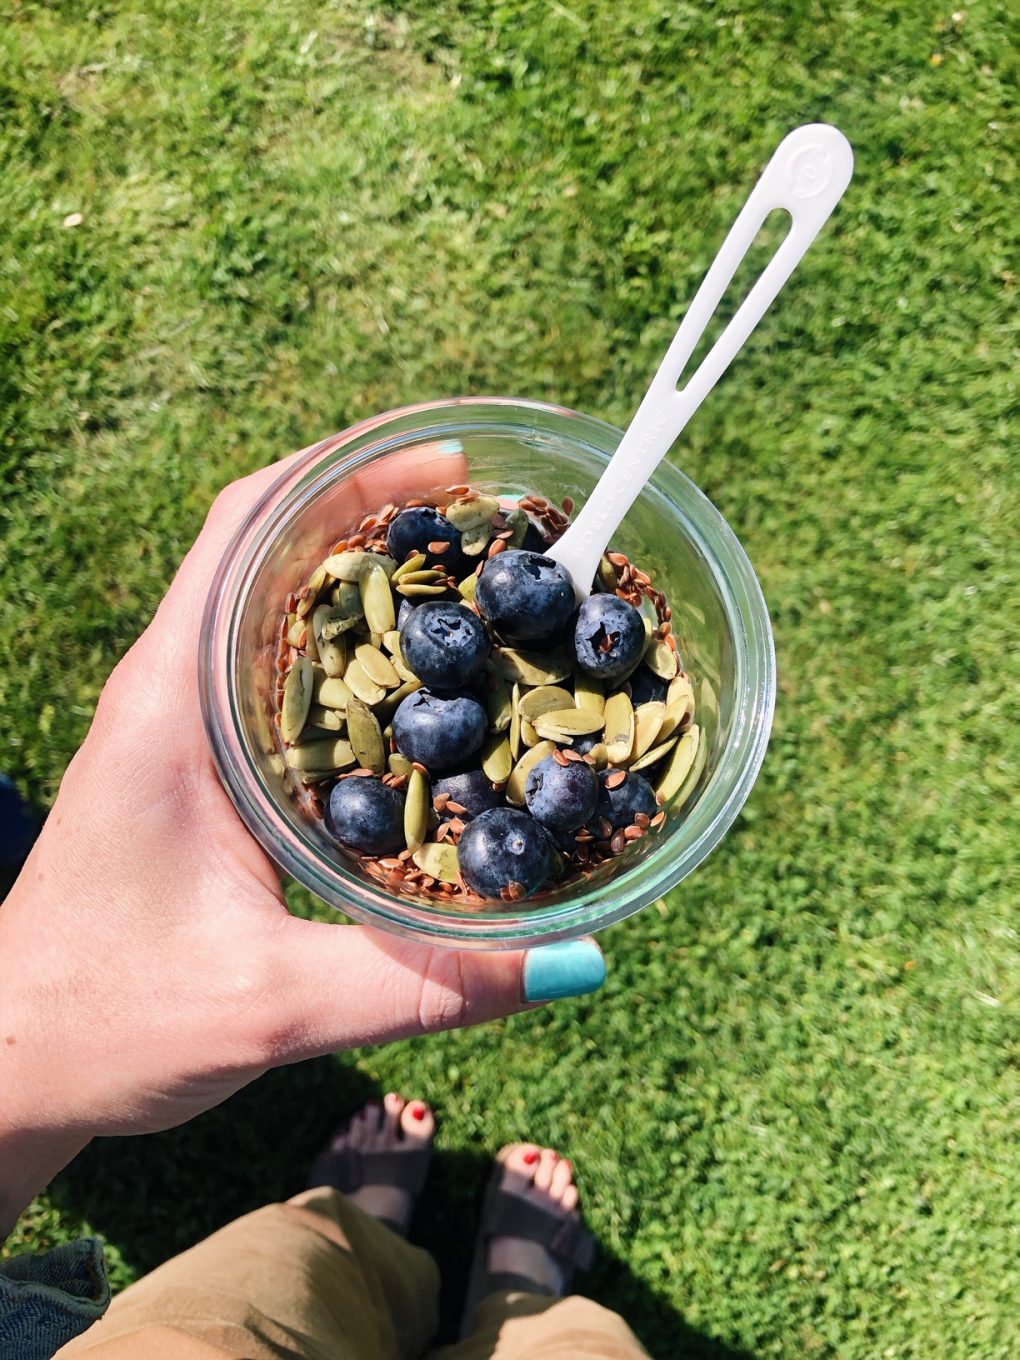 Holding a glass jar with coconut yogurt over green grass. Topped with fresh blueberries, pumpkin seeds, and flax seeds.